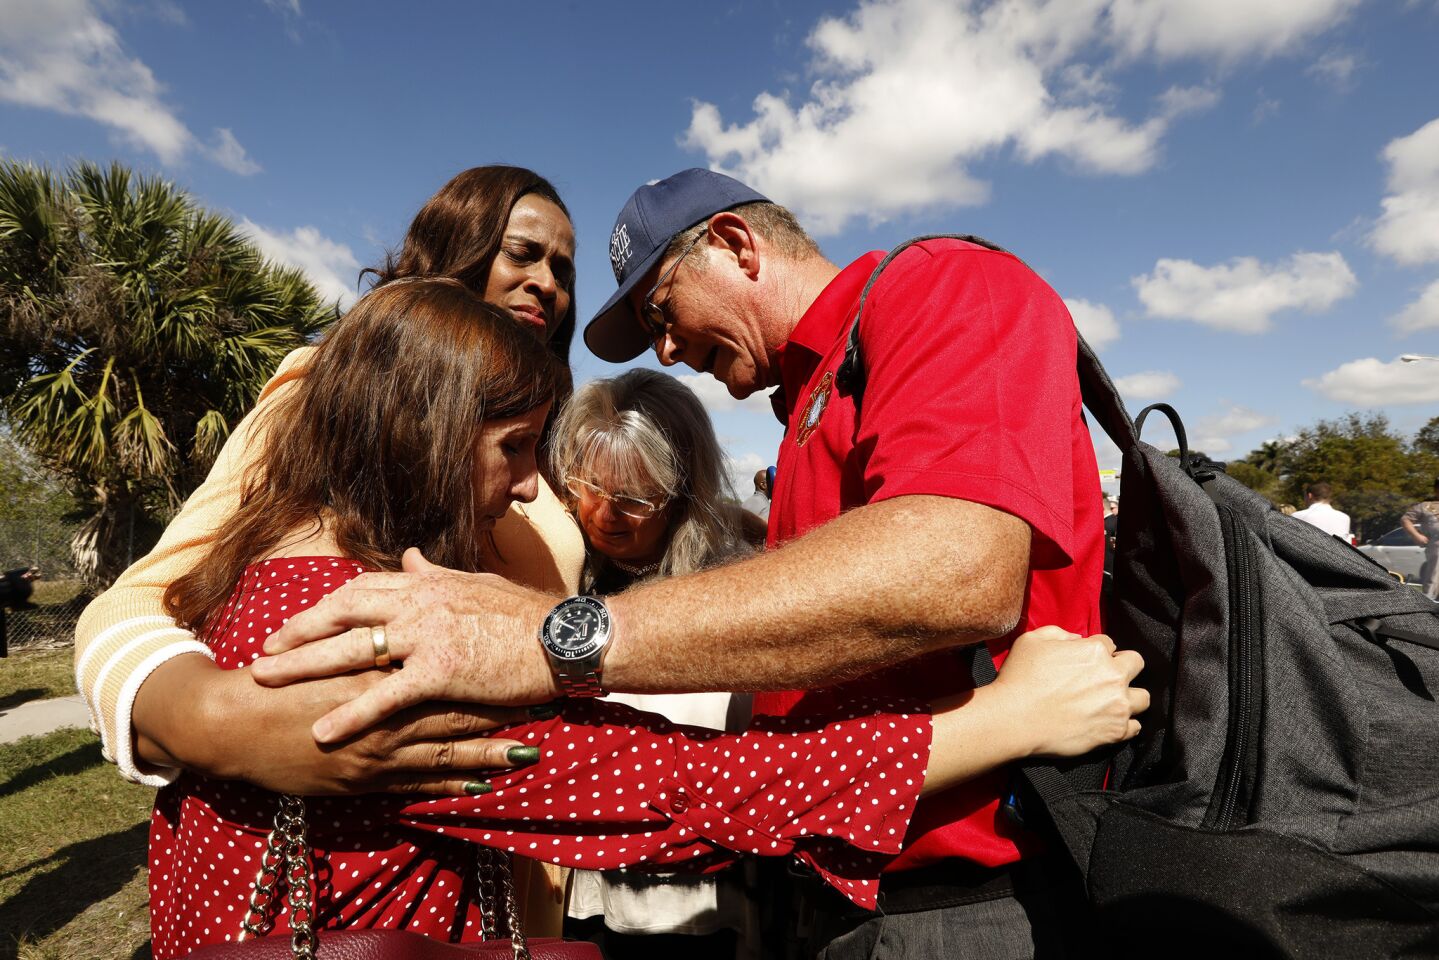 Broward County school board members Robin Bartleman, left, and Rosalind Osgood, second from left, and Chaplain Robert Ossler of the City of Cape Coral Fire/Emergency Department, pray for the victims of the mass shooting after a news conference.